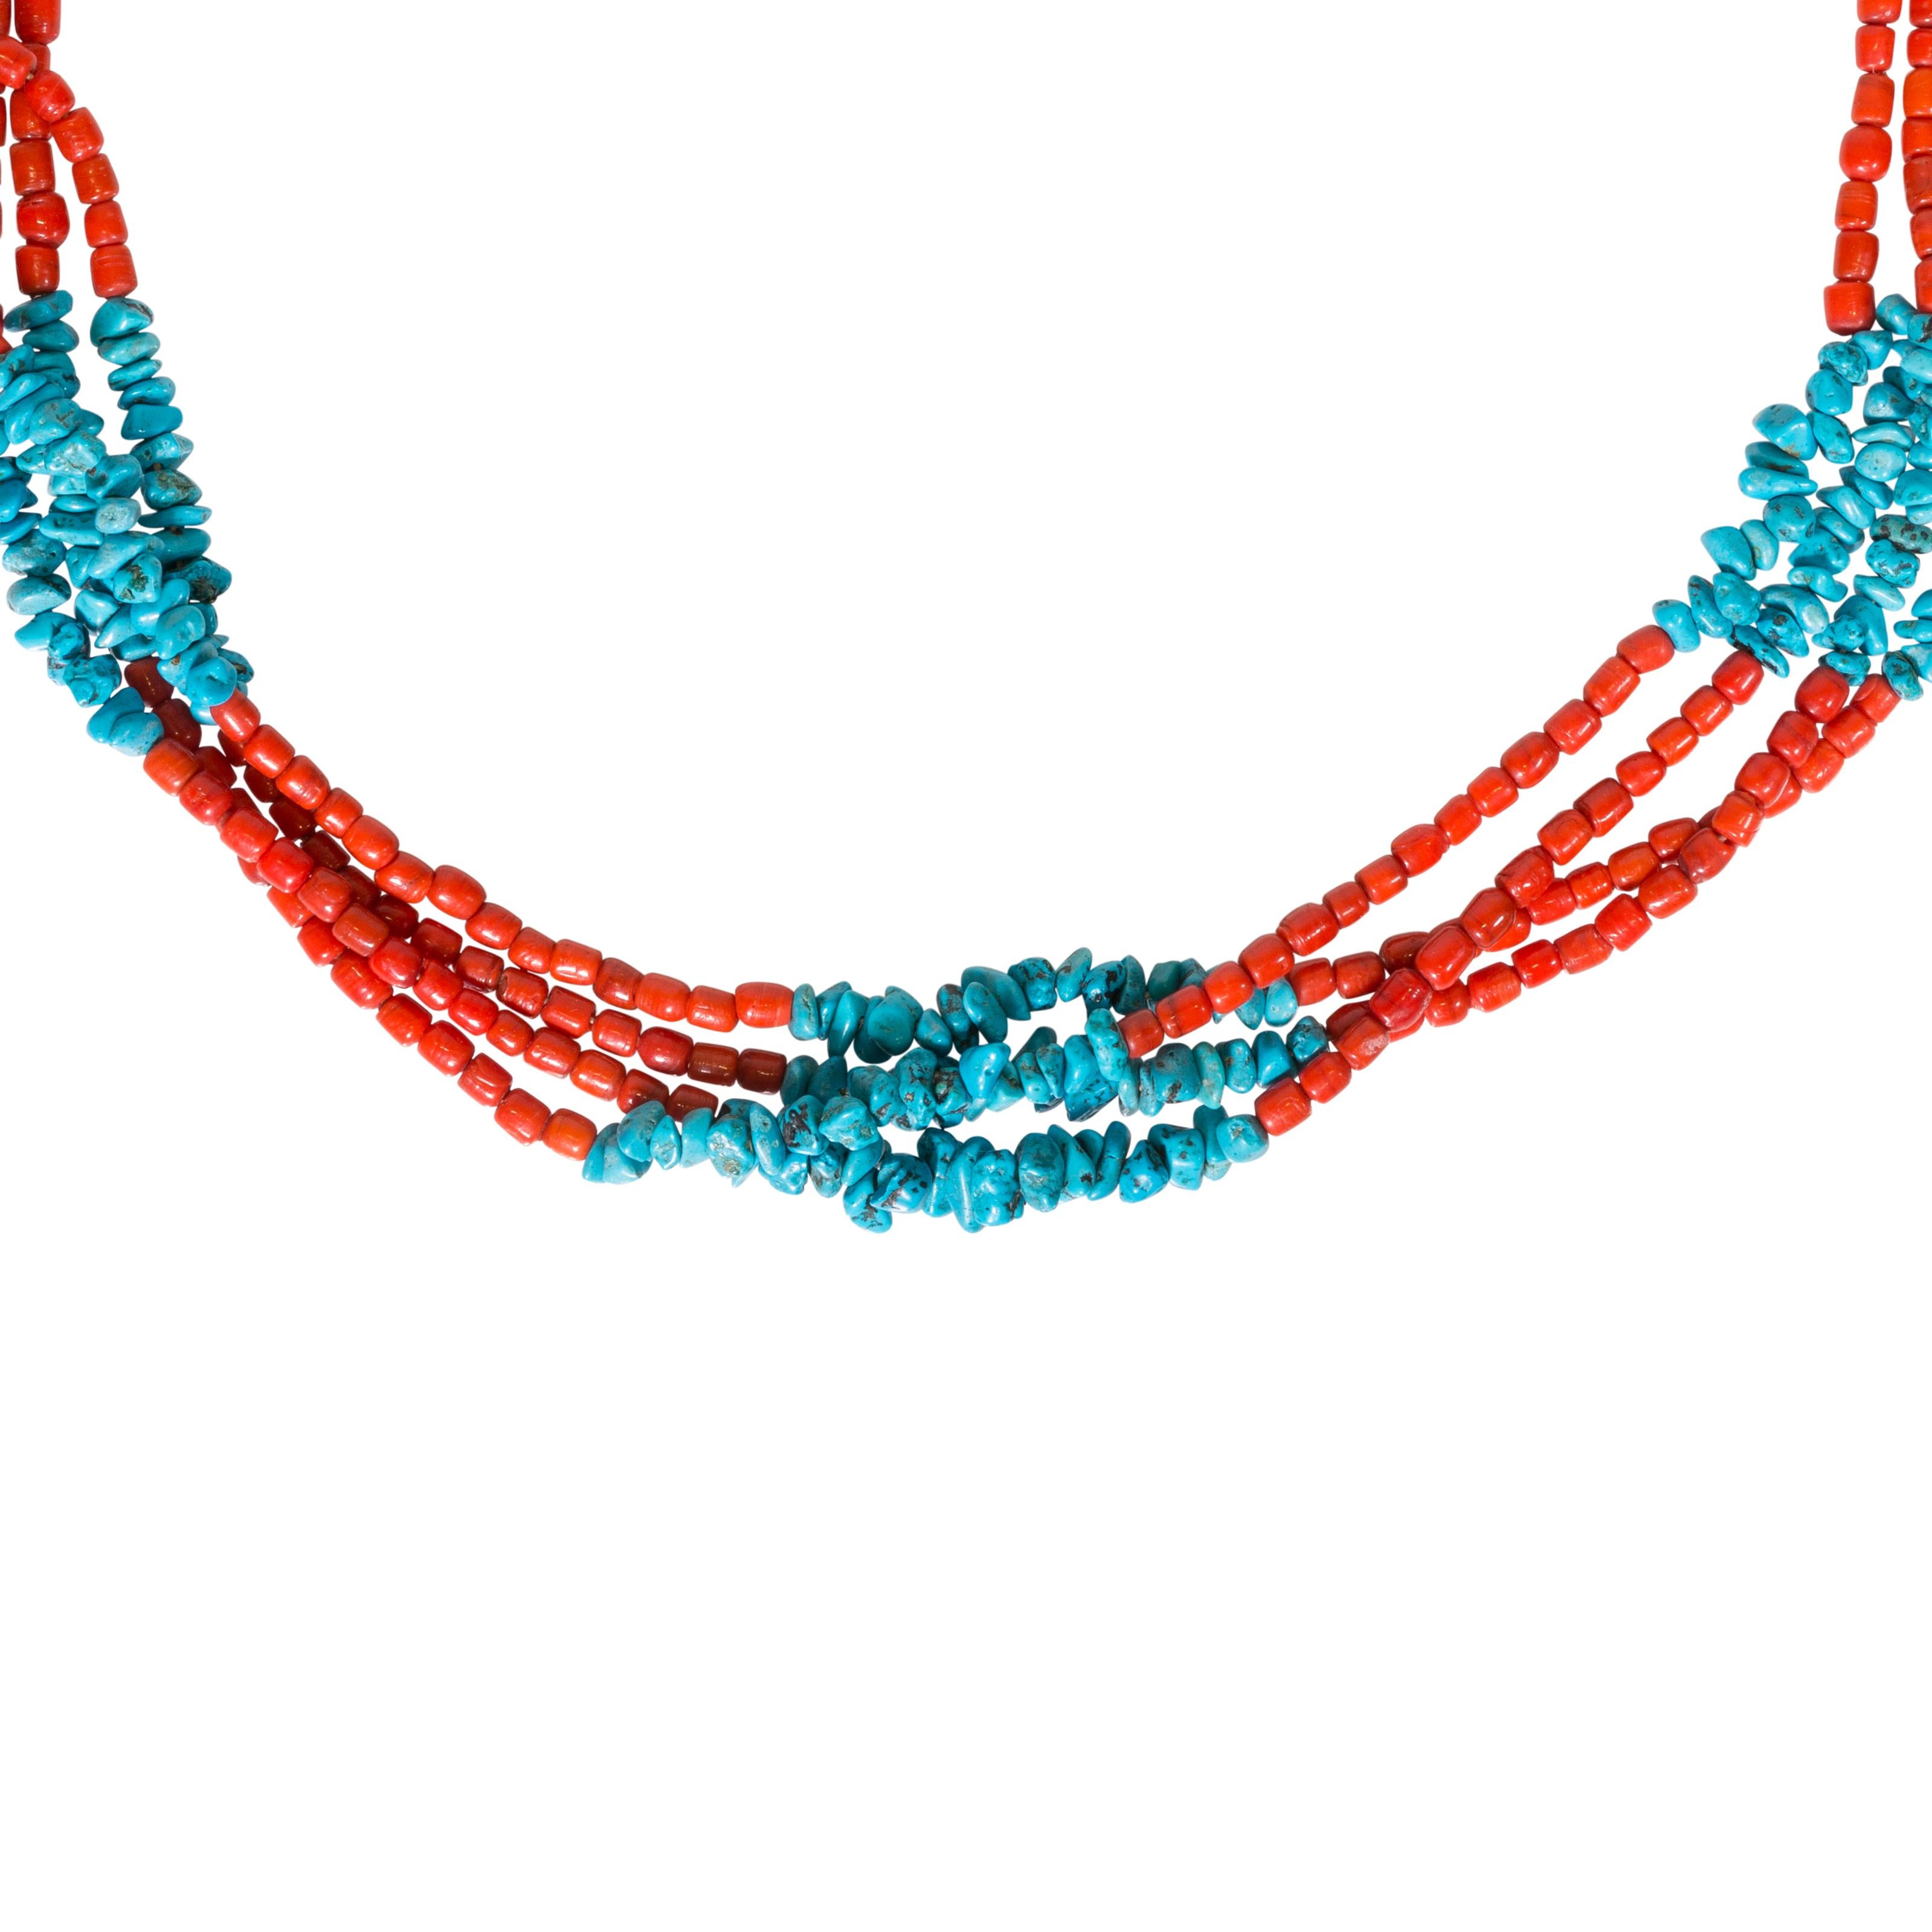 Santa Domingo four-strand necklace with stunning red jasper beads and turquoise pebbles.

PERIOD: After 1950
ORIGIN: Santa Domingo, Southwest
SIZE: 35